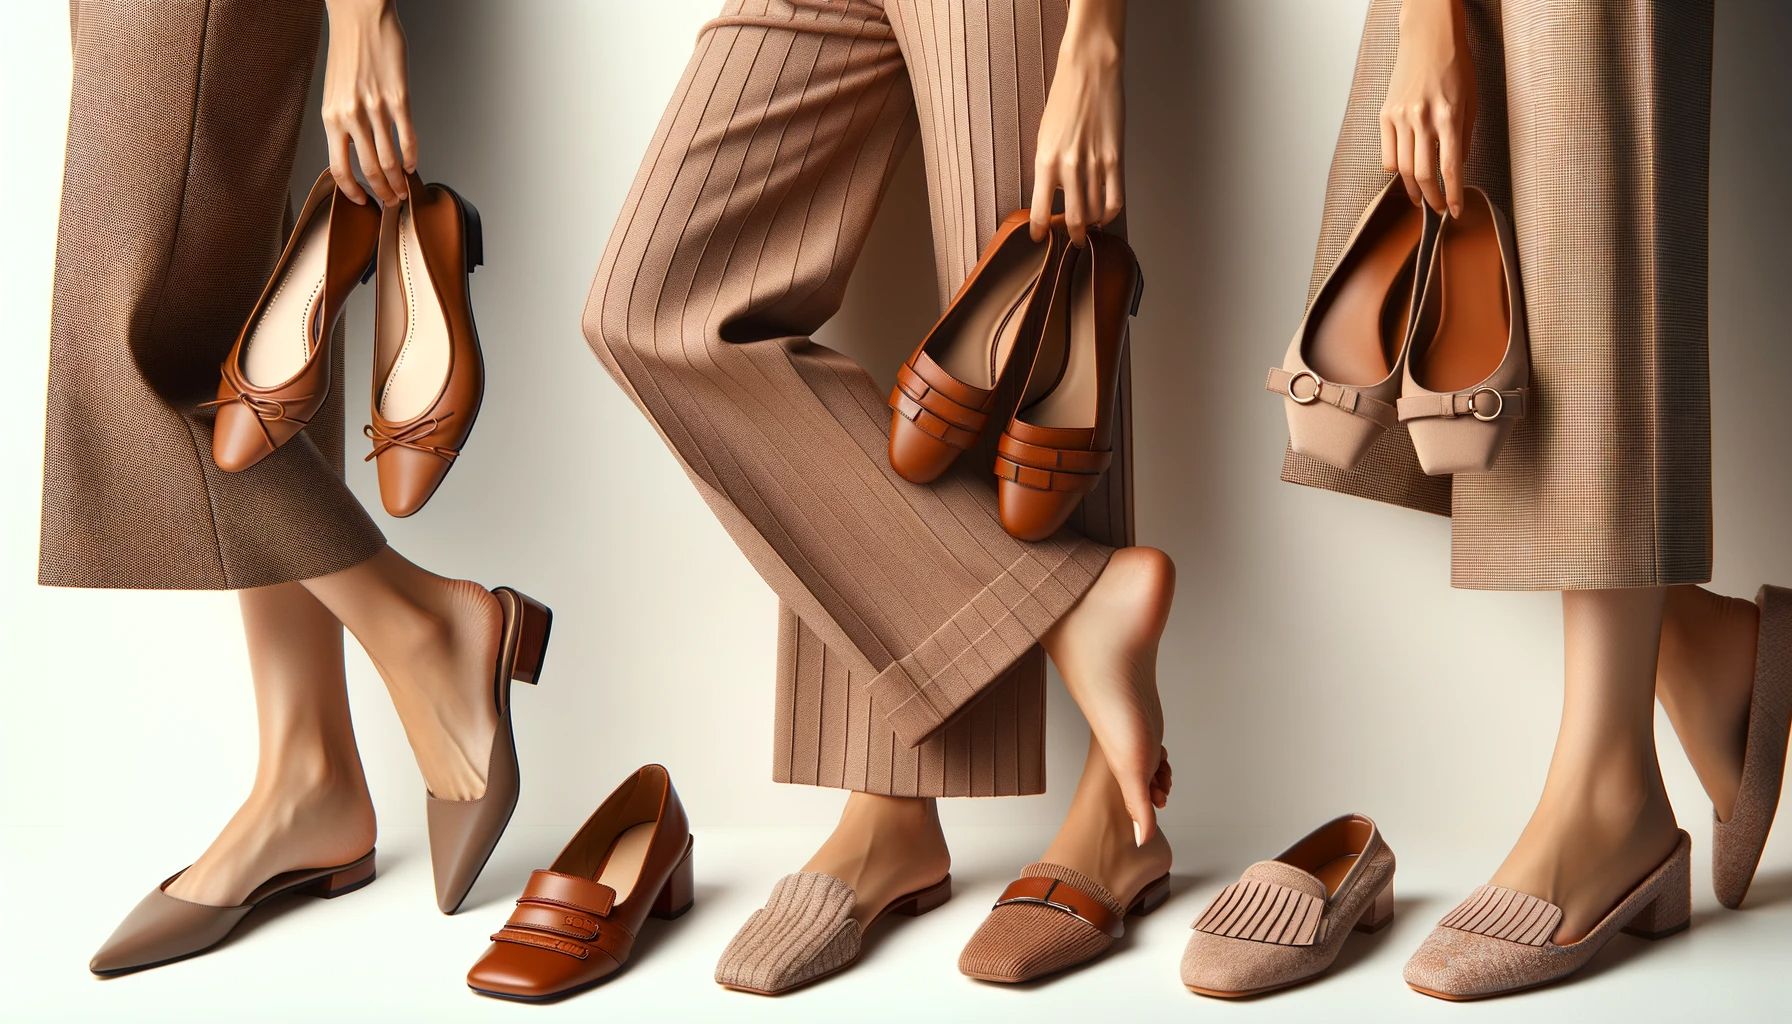 flats like ballet flats, loafers, and mules, each matched with wide leg pants,